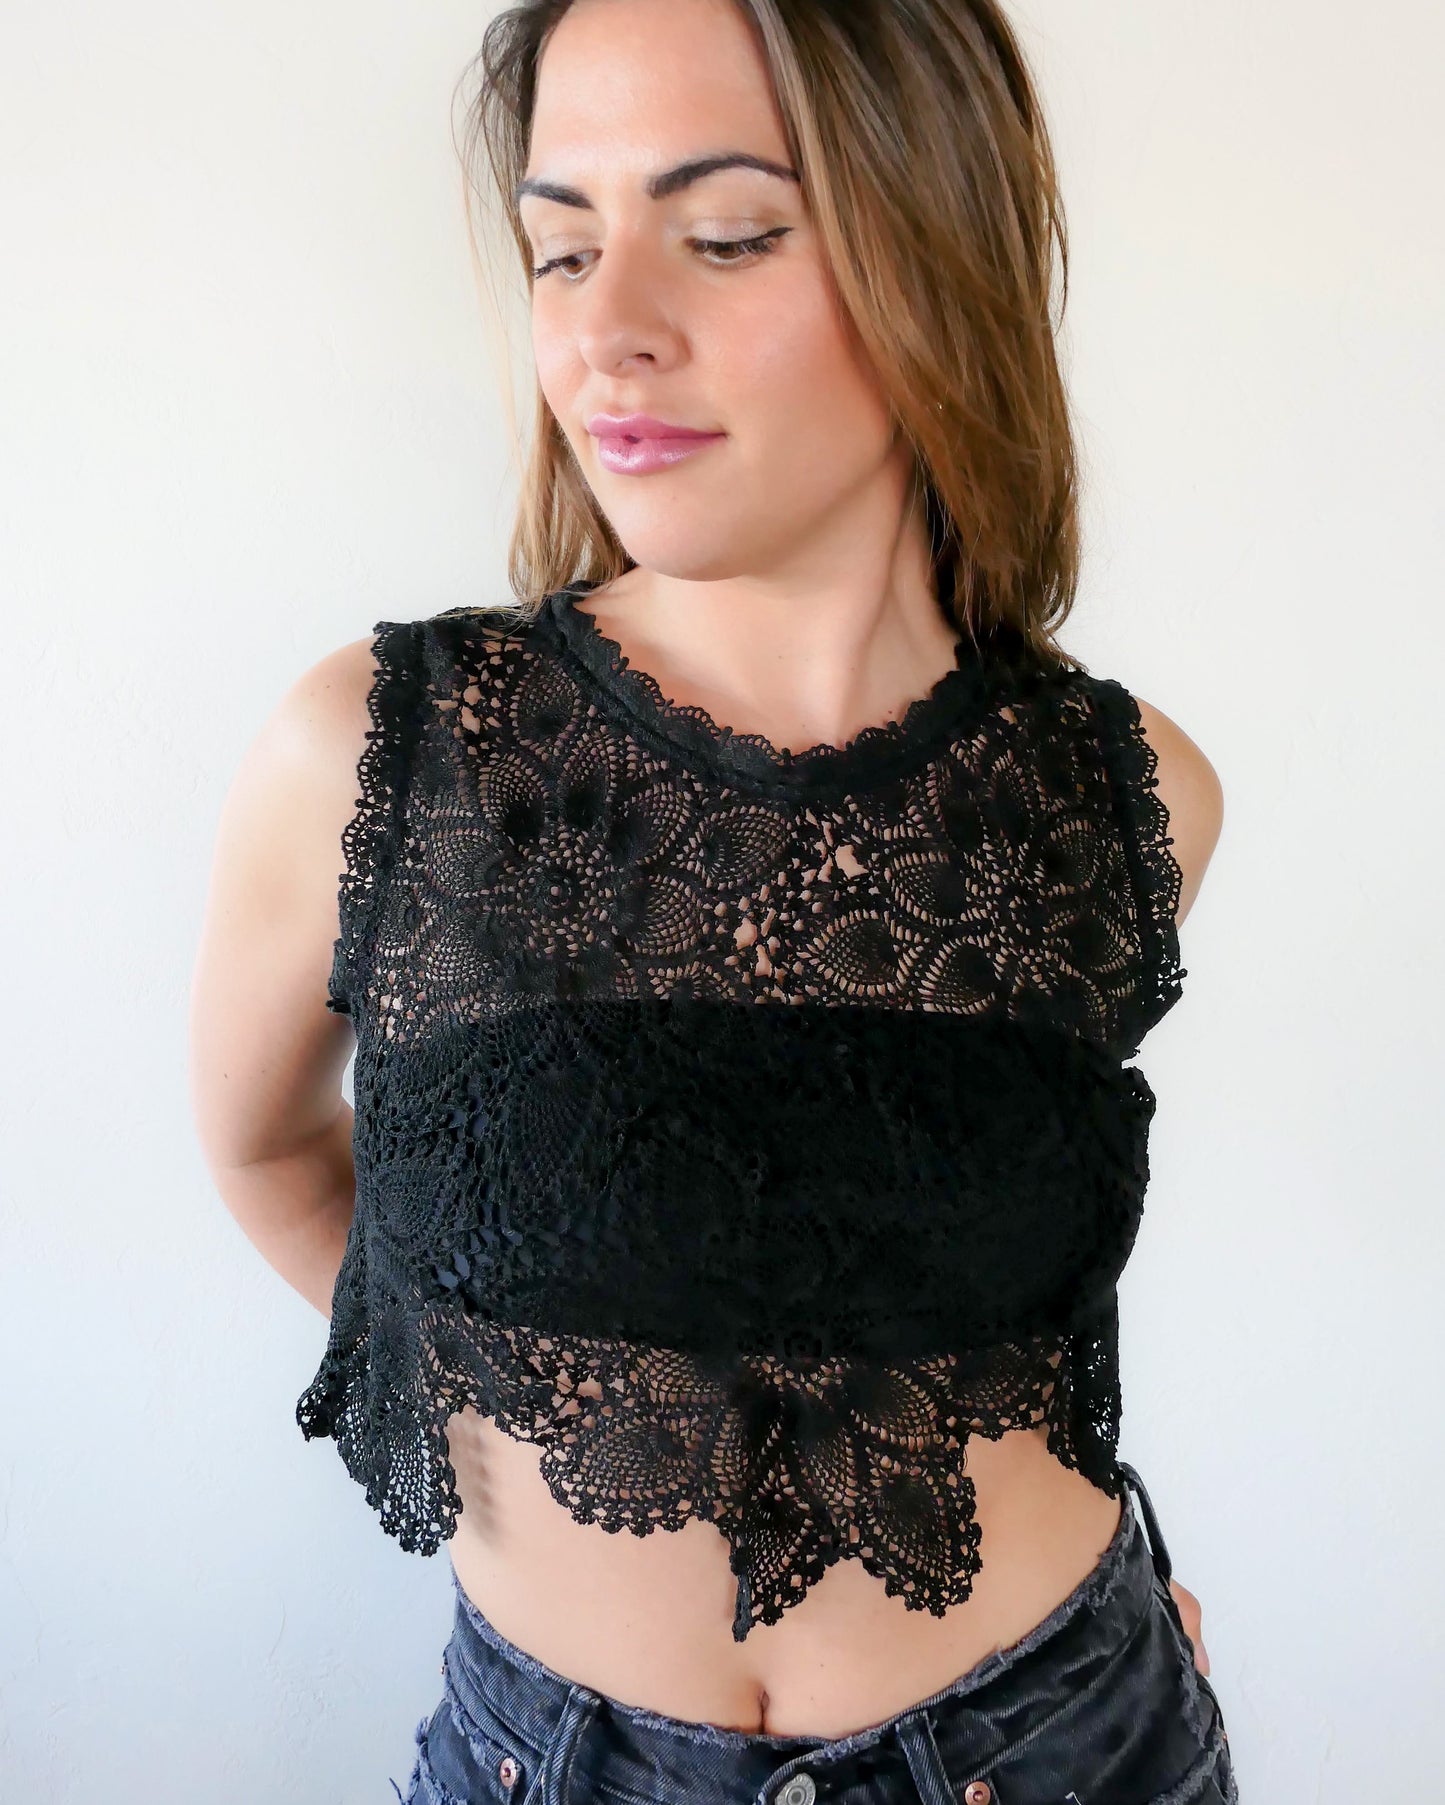 An ultra casual, hip, and boho-chic crop tank top made with interconnected flower doilies reminiscent of the white lotus, which symbolizes peace, tranquility, and calmness.  Lace trim at the collar and sleeve.  Model is wearing black colored top. 